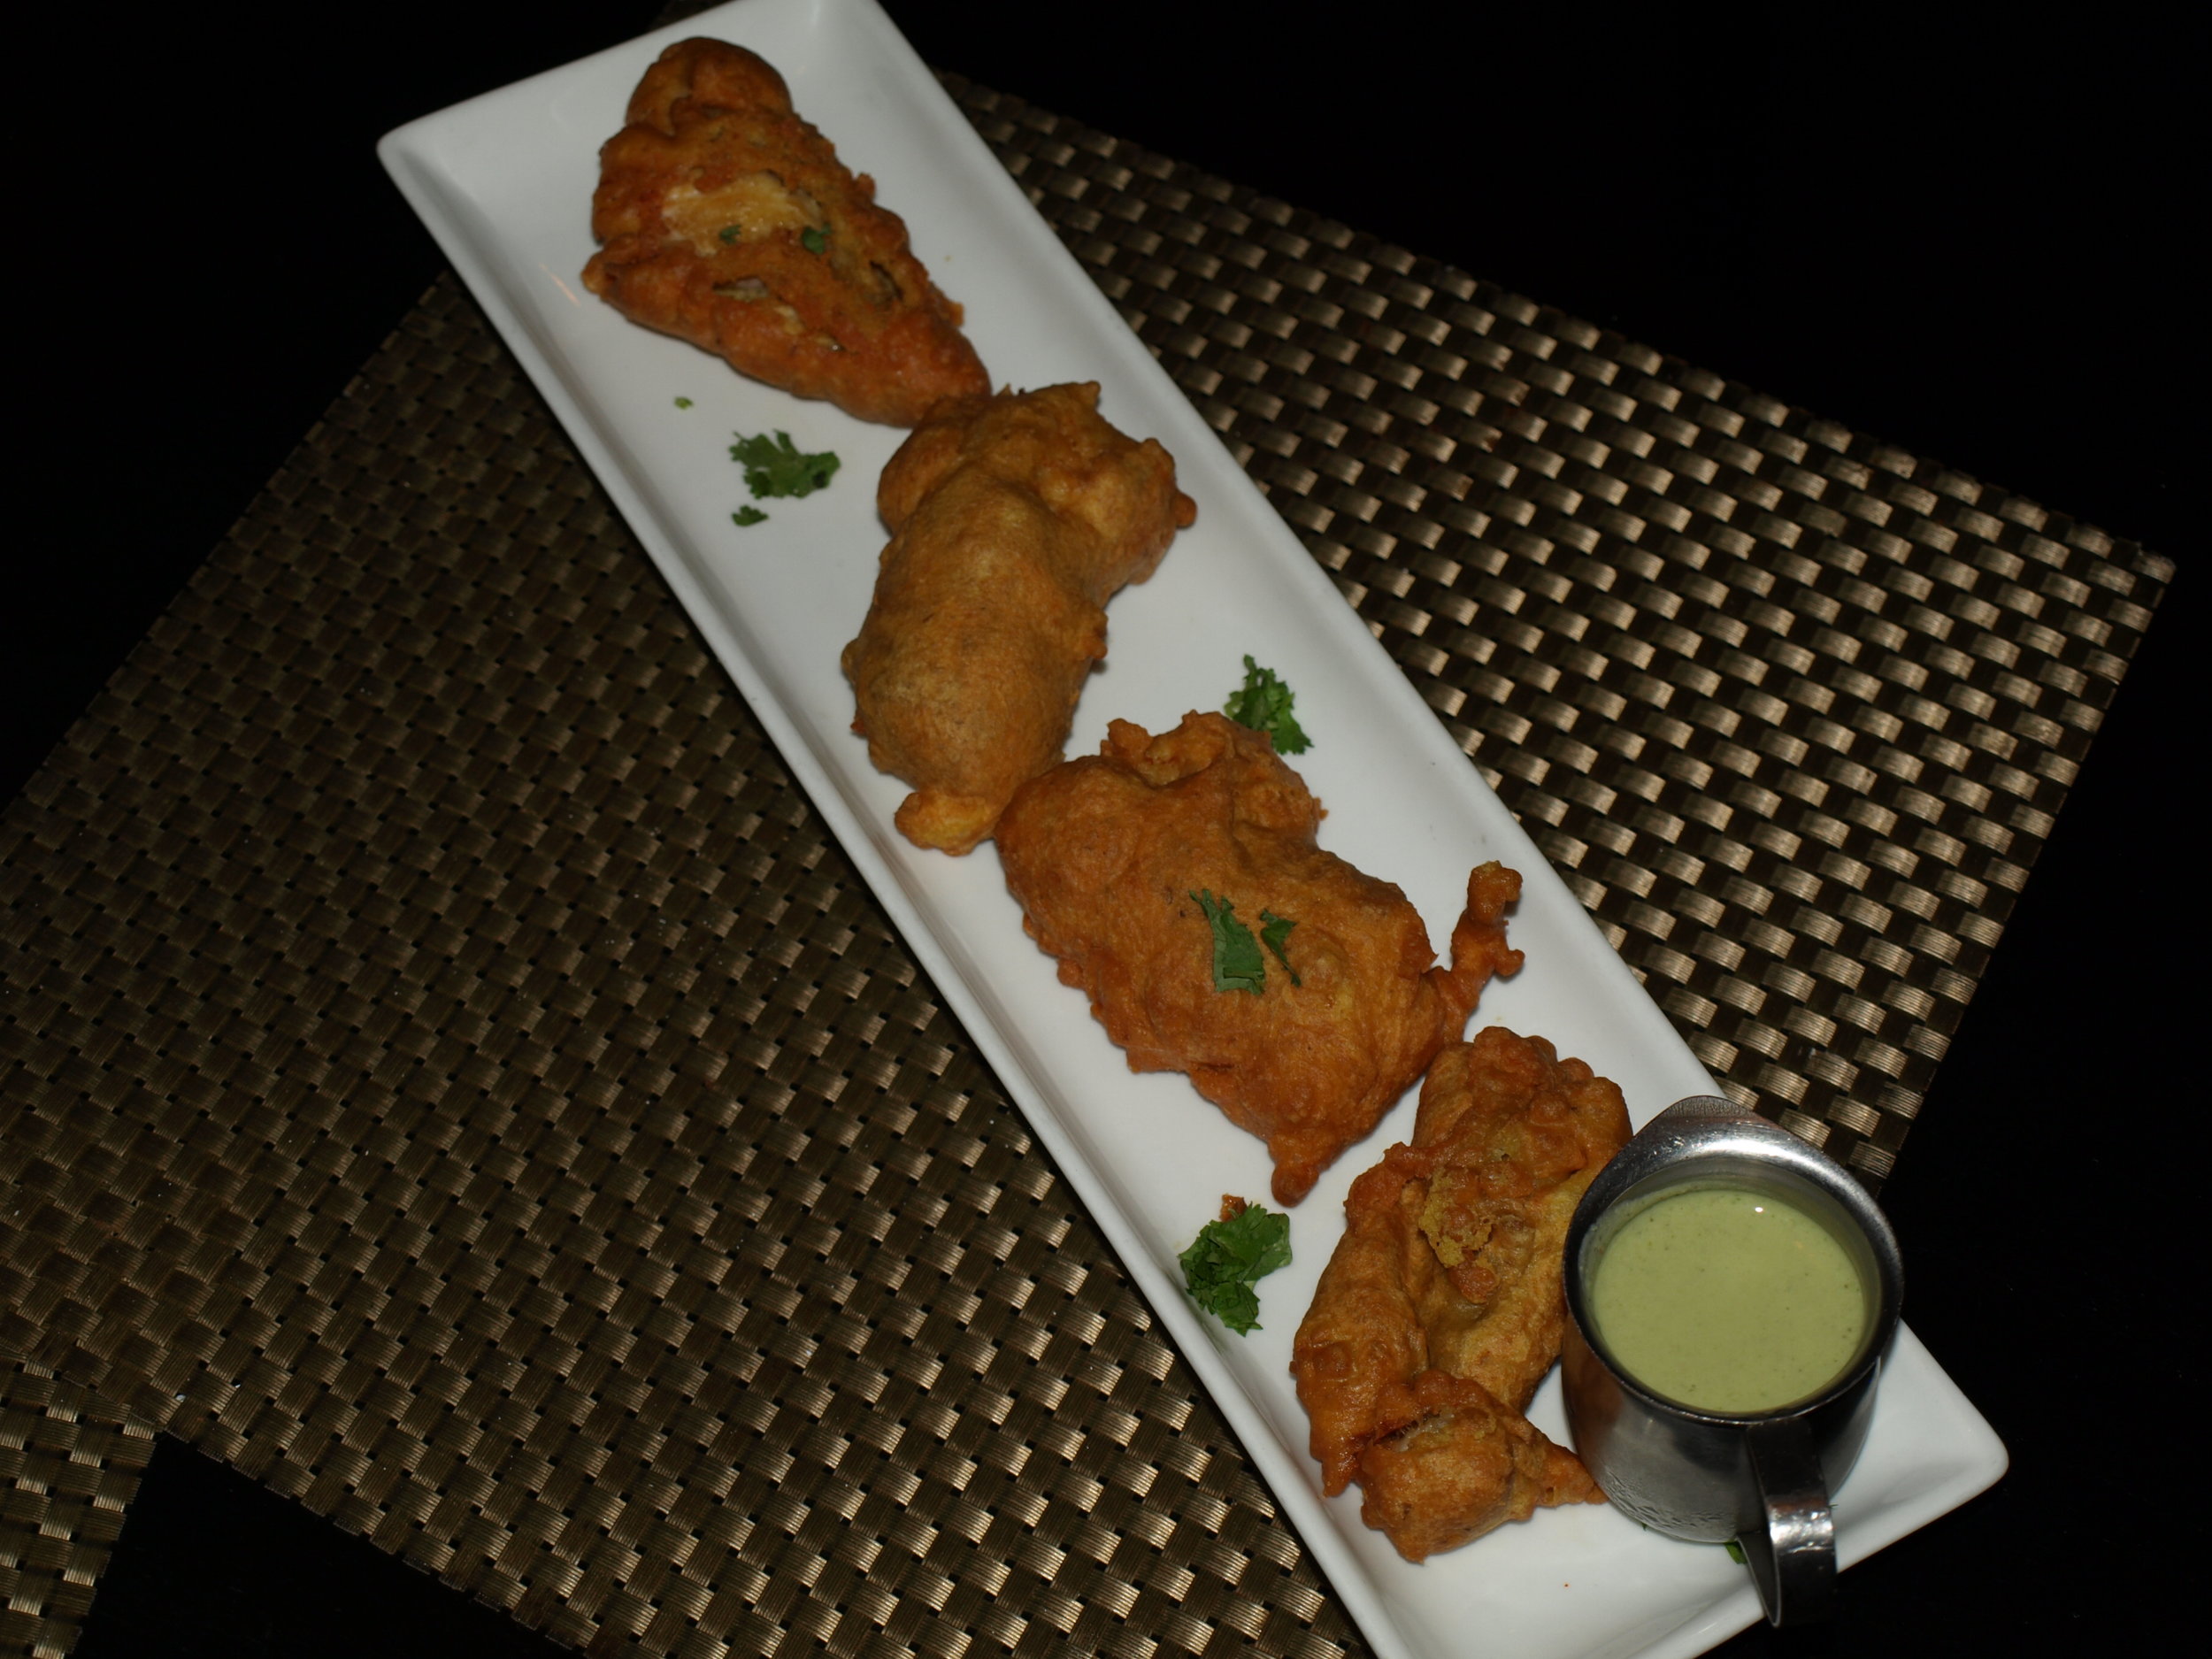   The Bombay Fritters ($12) are fish fried in a chickpea batter served with a mint and green chili chutney sauce.   Long Islander News Photo/Connor Beach  